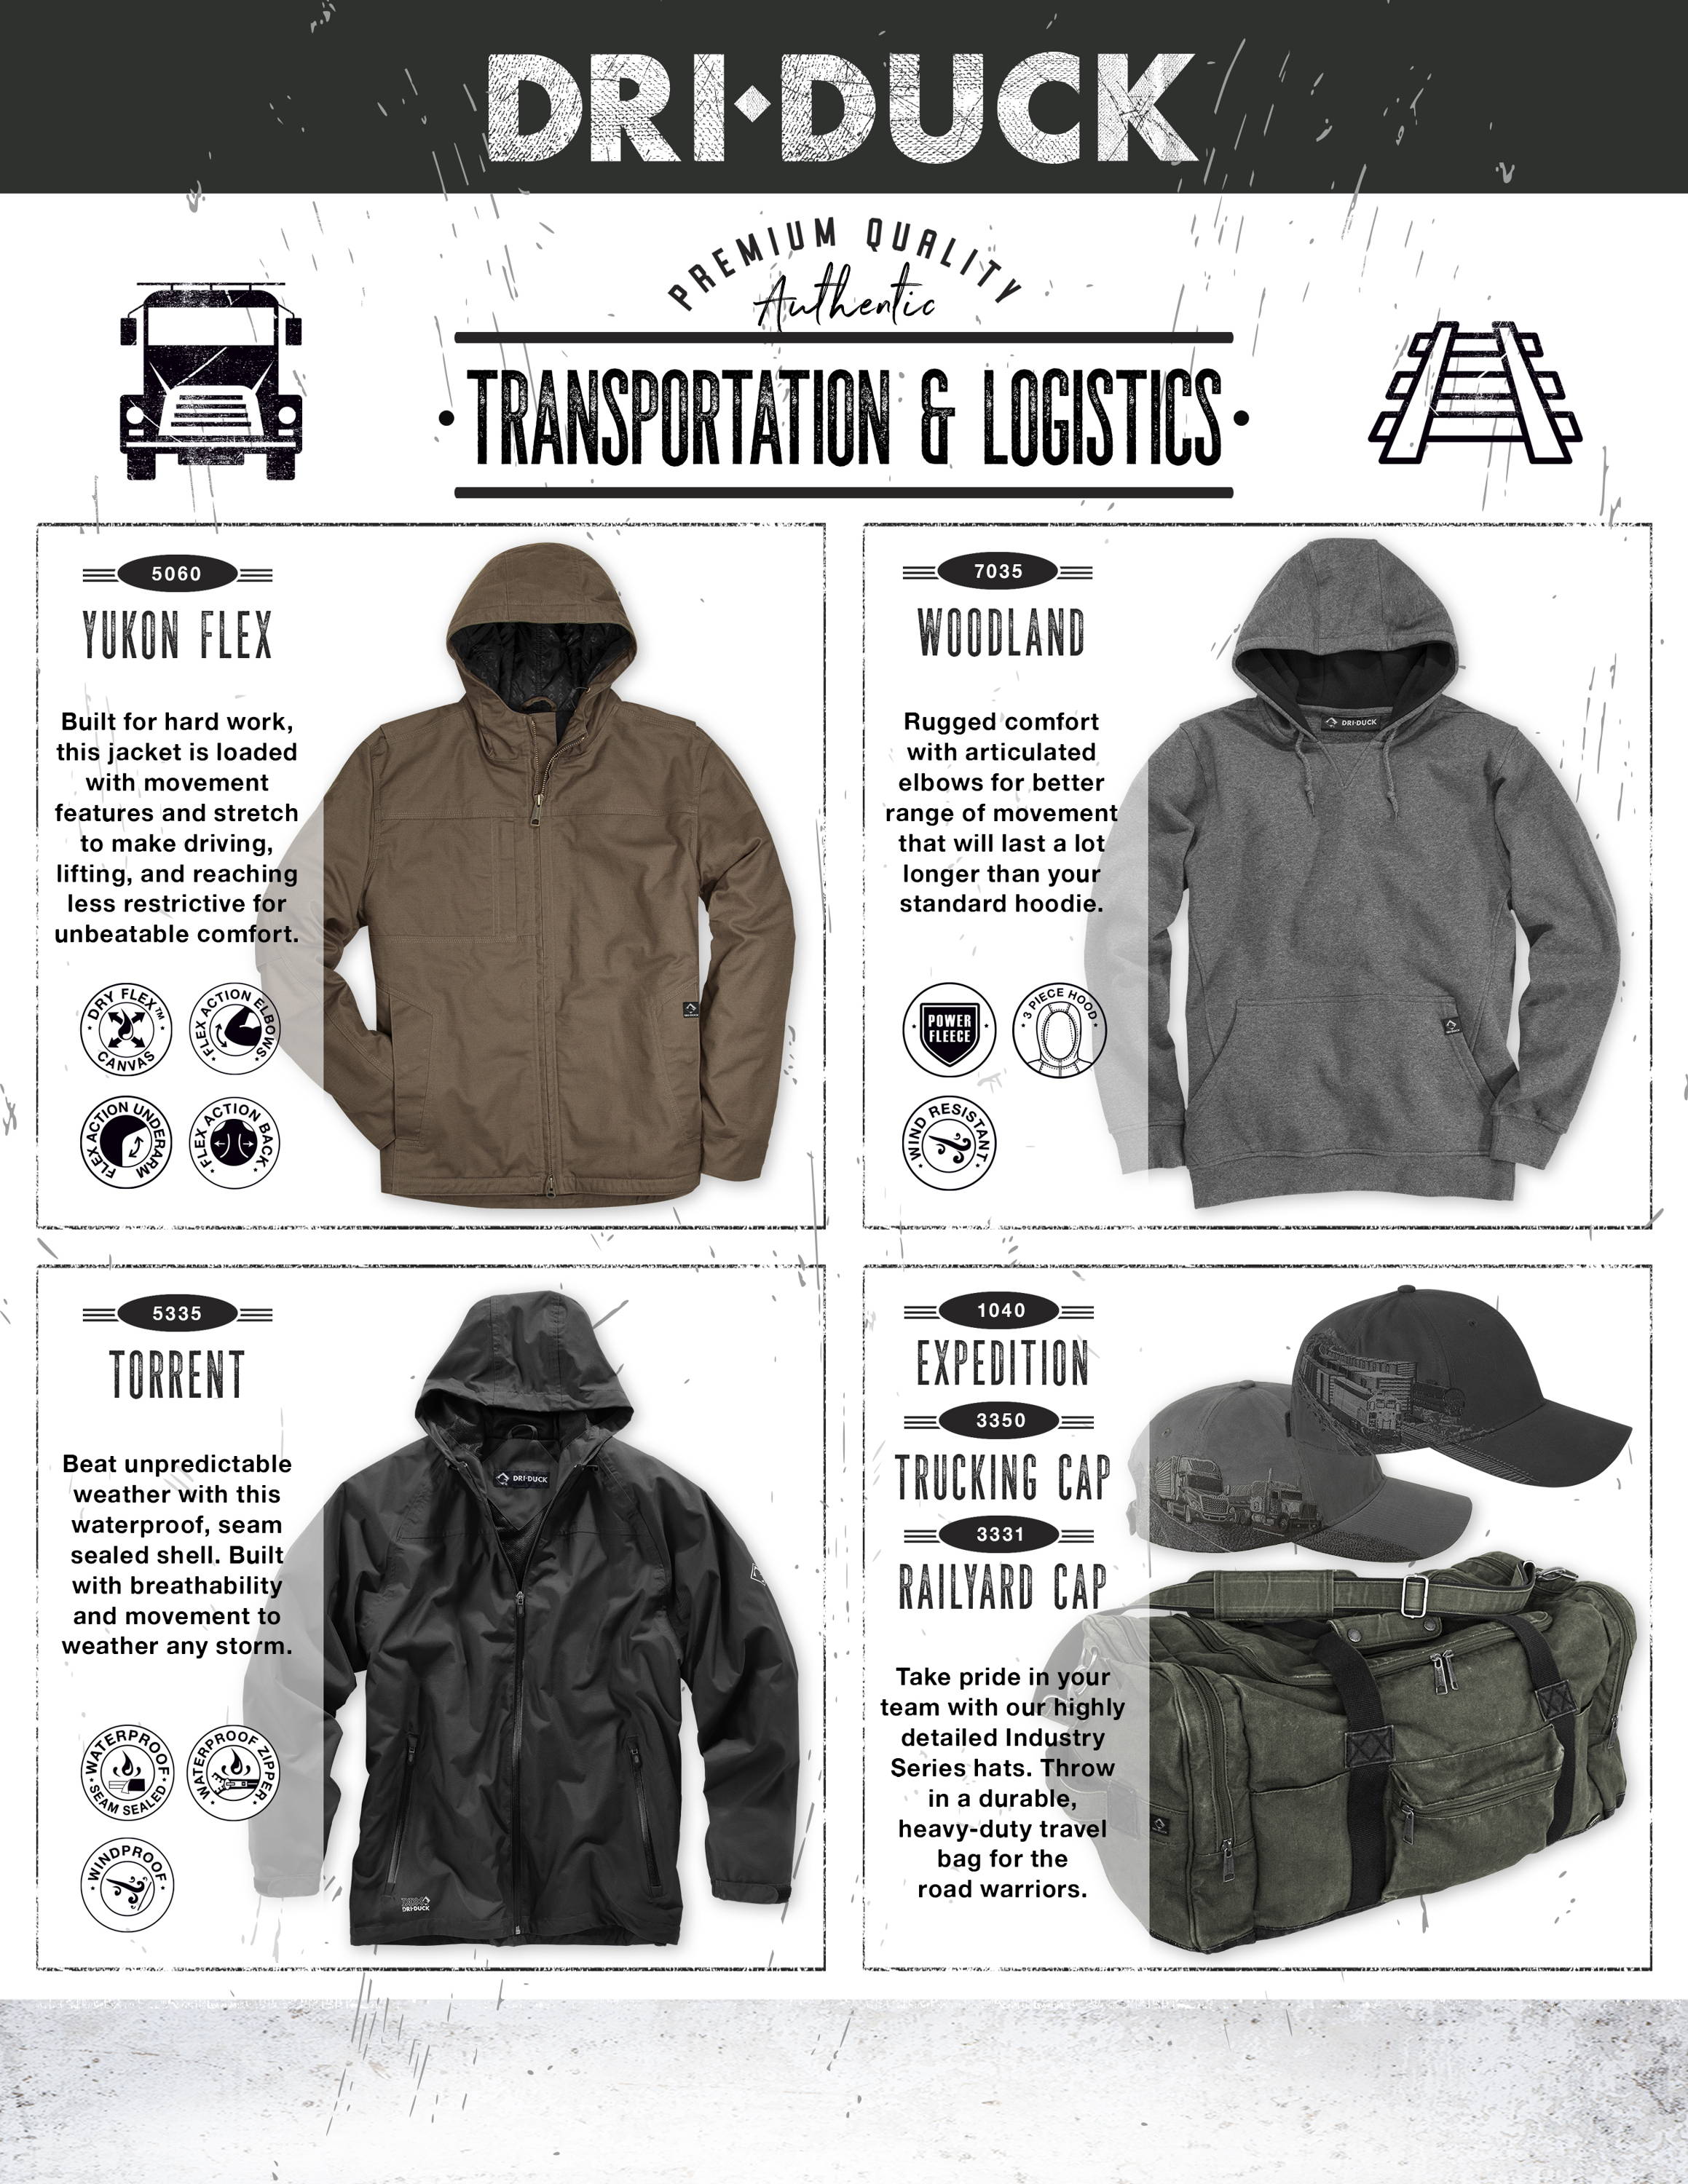 Work jackets for transportation jobs from DRI DUCK